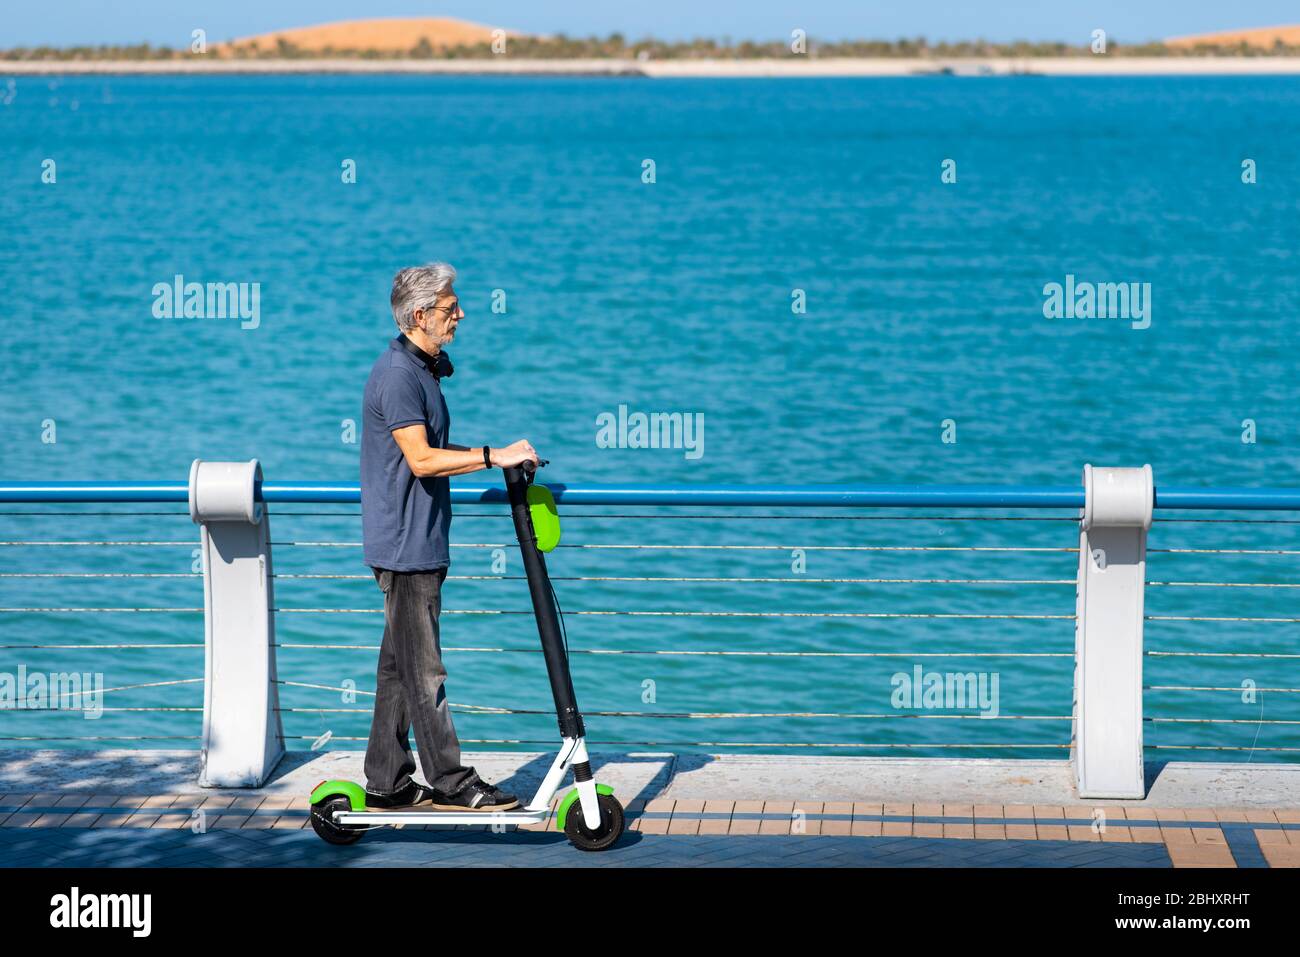 Senior man using electric scooter for transportation by the seaside. Healthy outdoors senior lifestyle Stock Photo